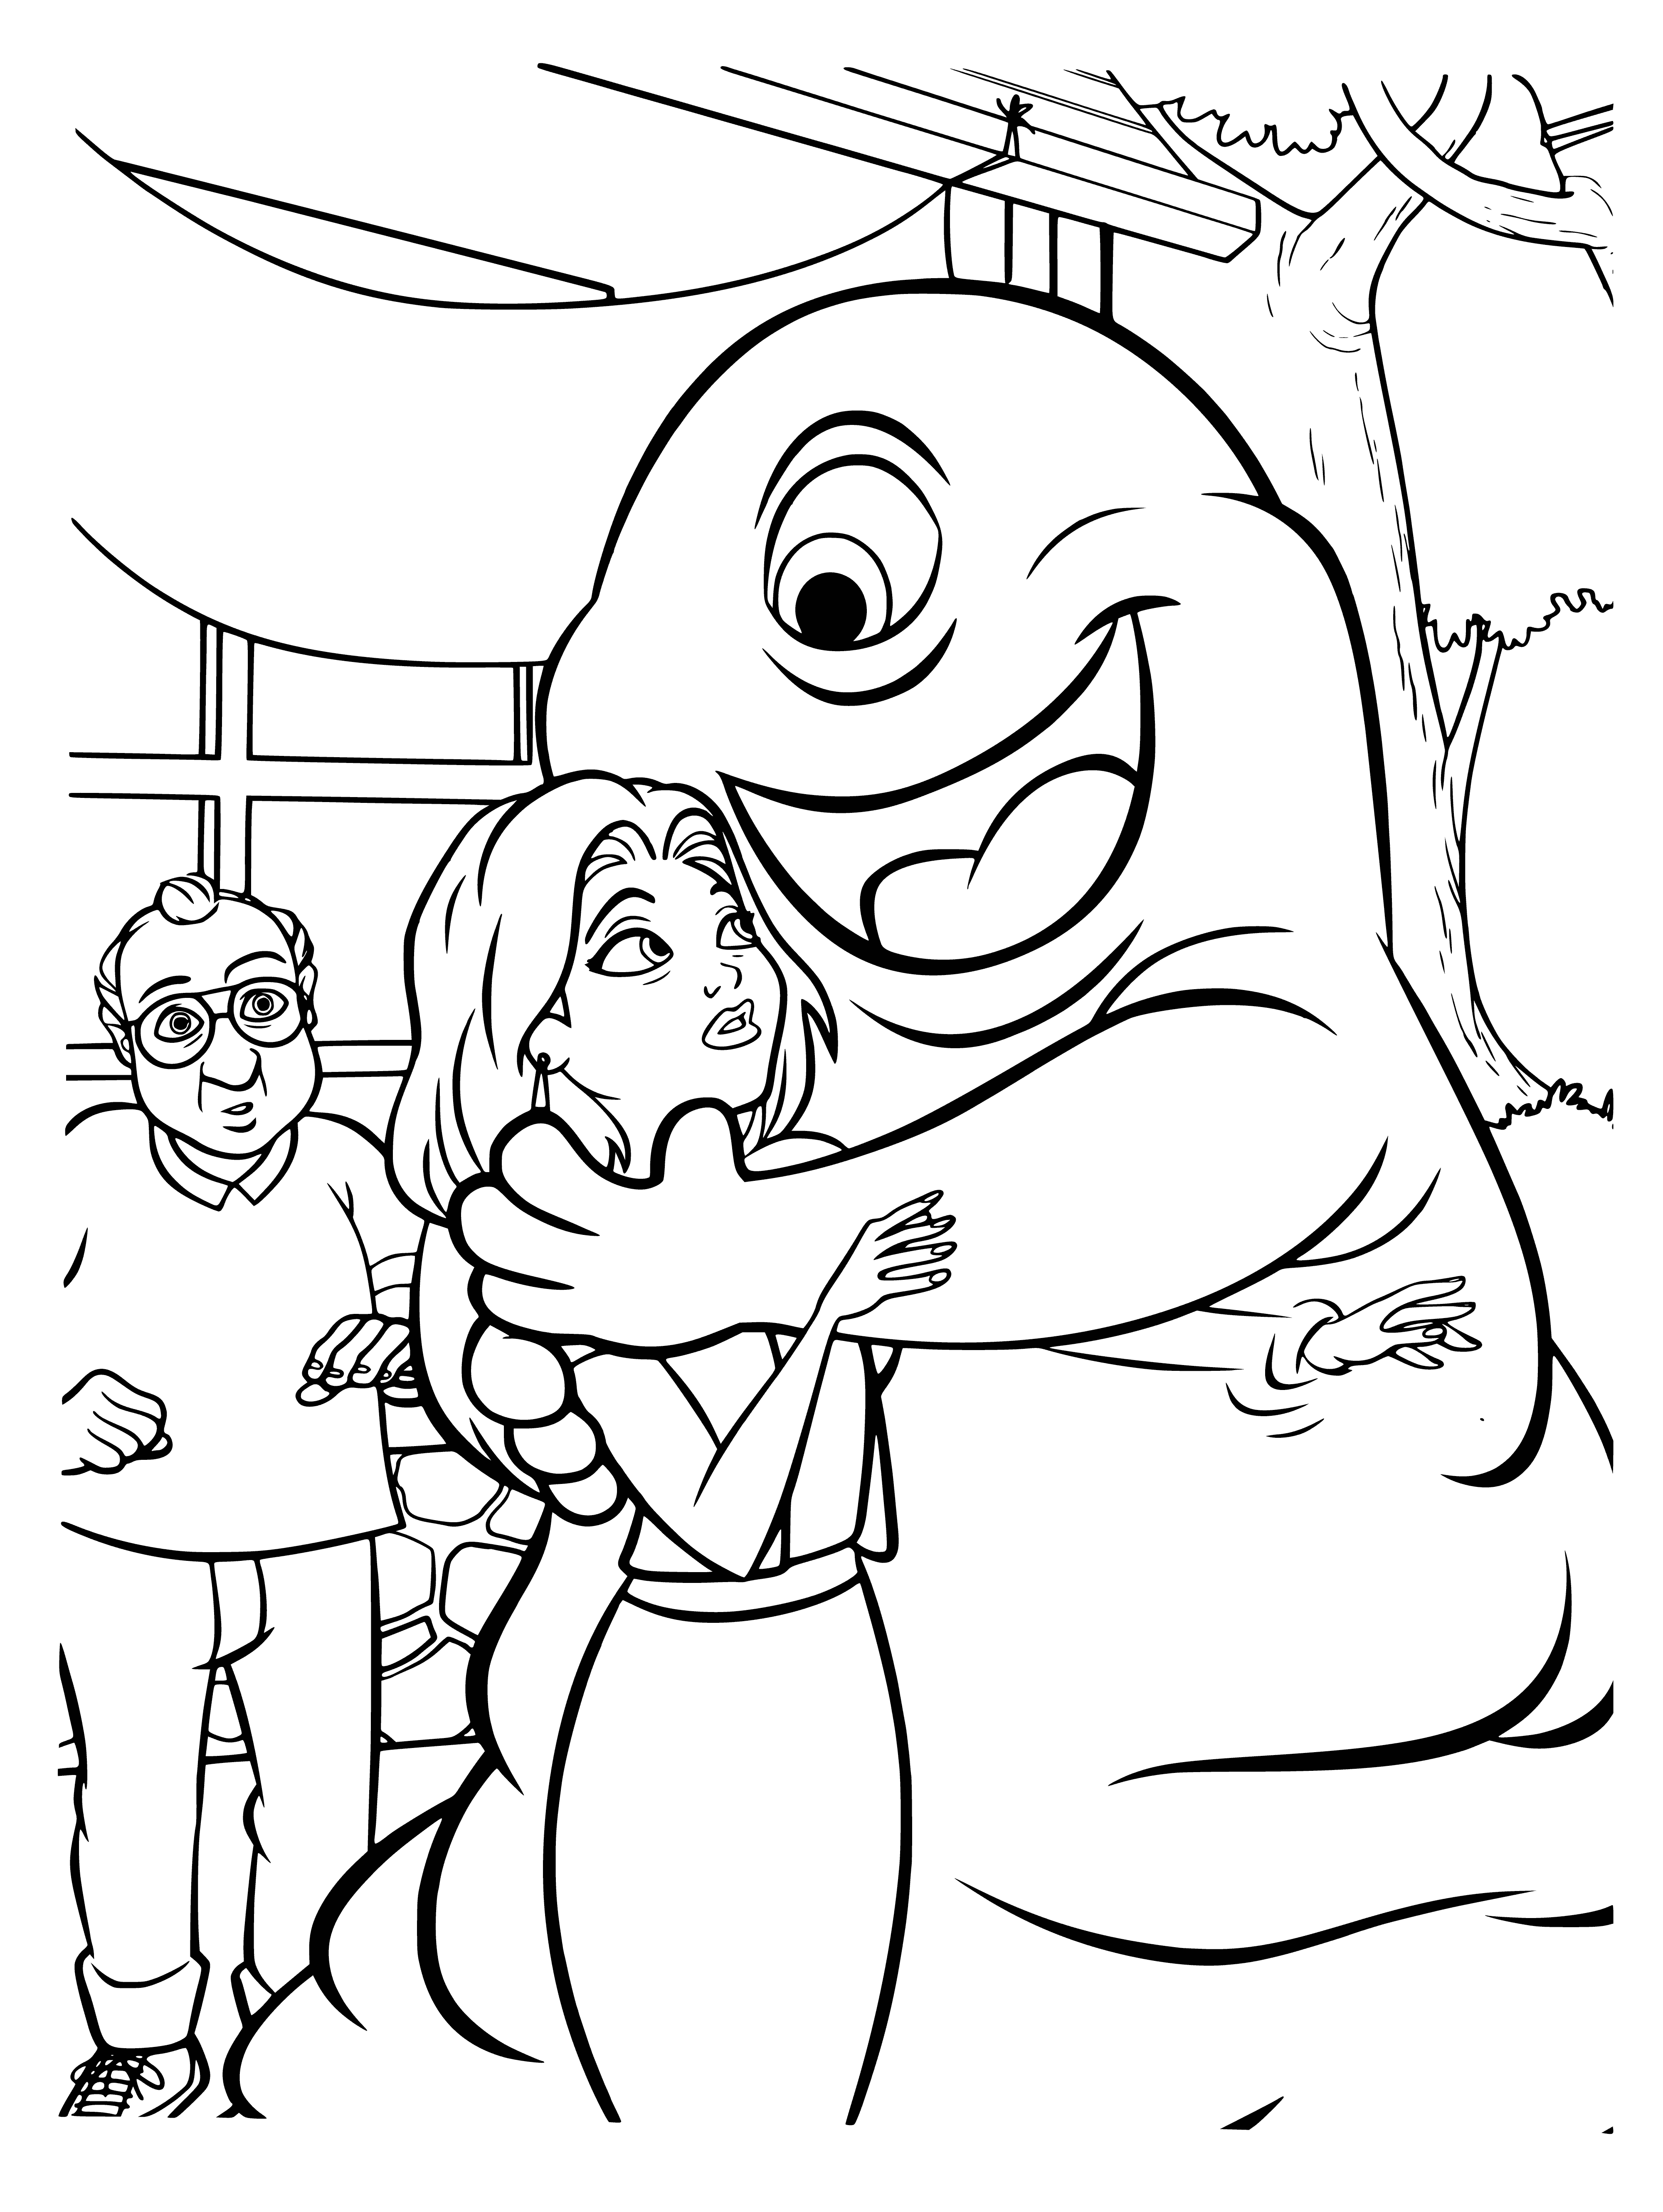 coloring page: Susan and B.O.B. are two very different creatures standing on a grassy hill.